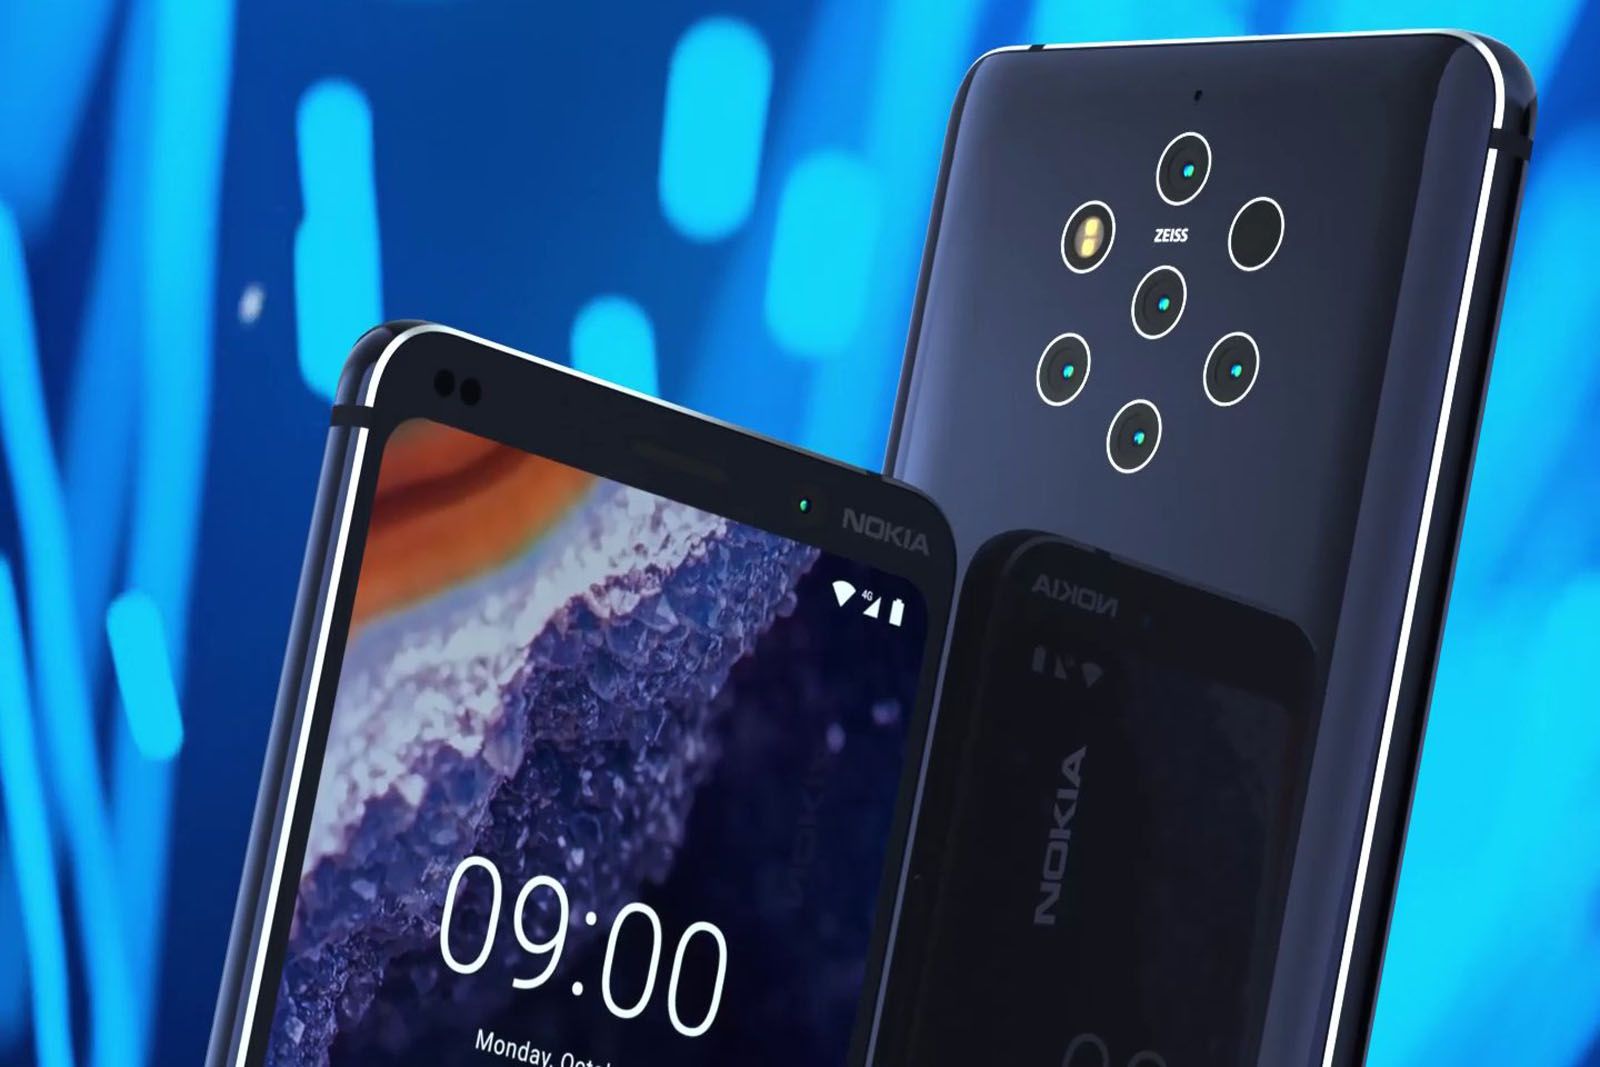 Nokia 9 PureView gets certified in China ahead of MWC launch image 1